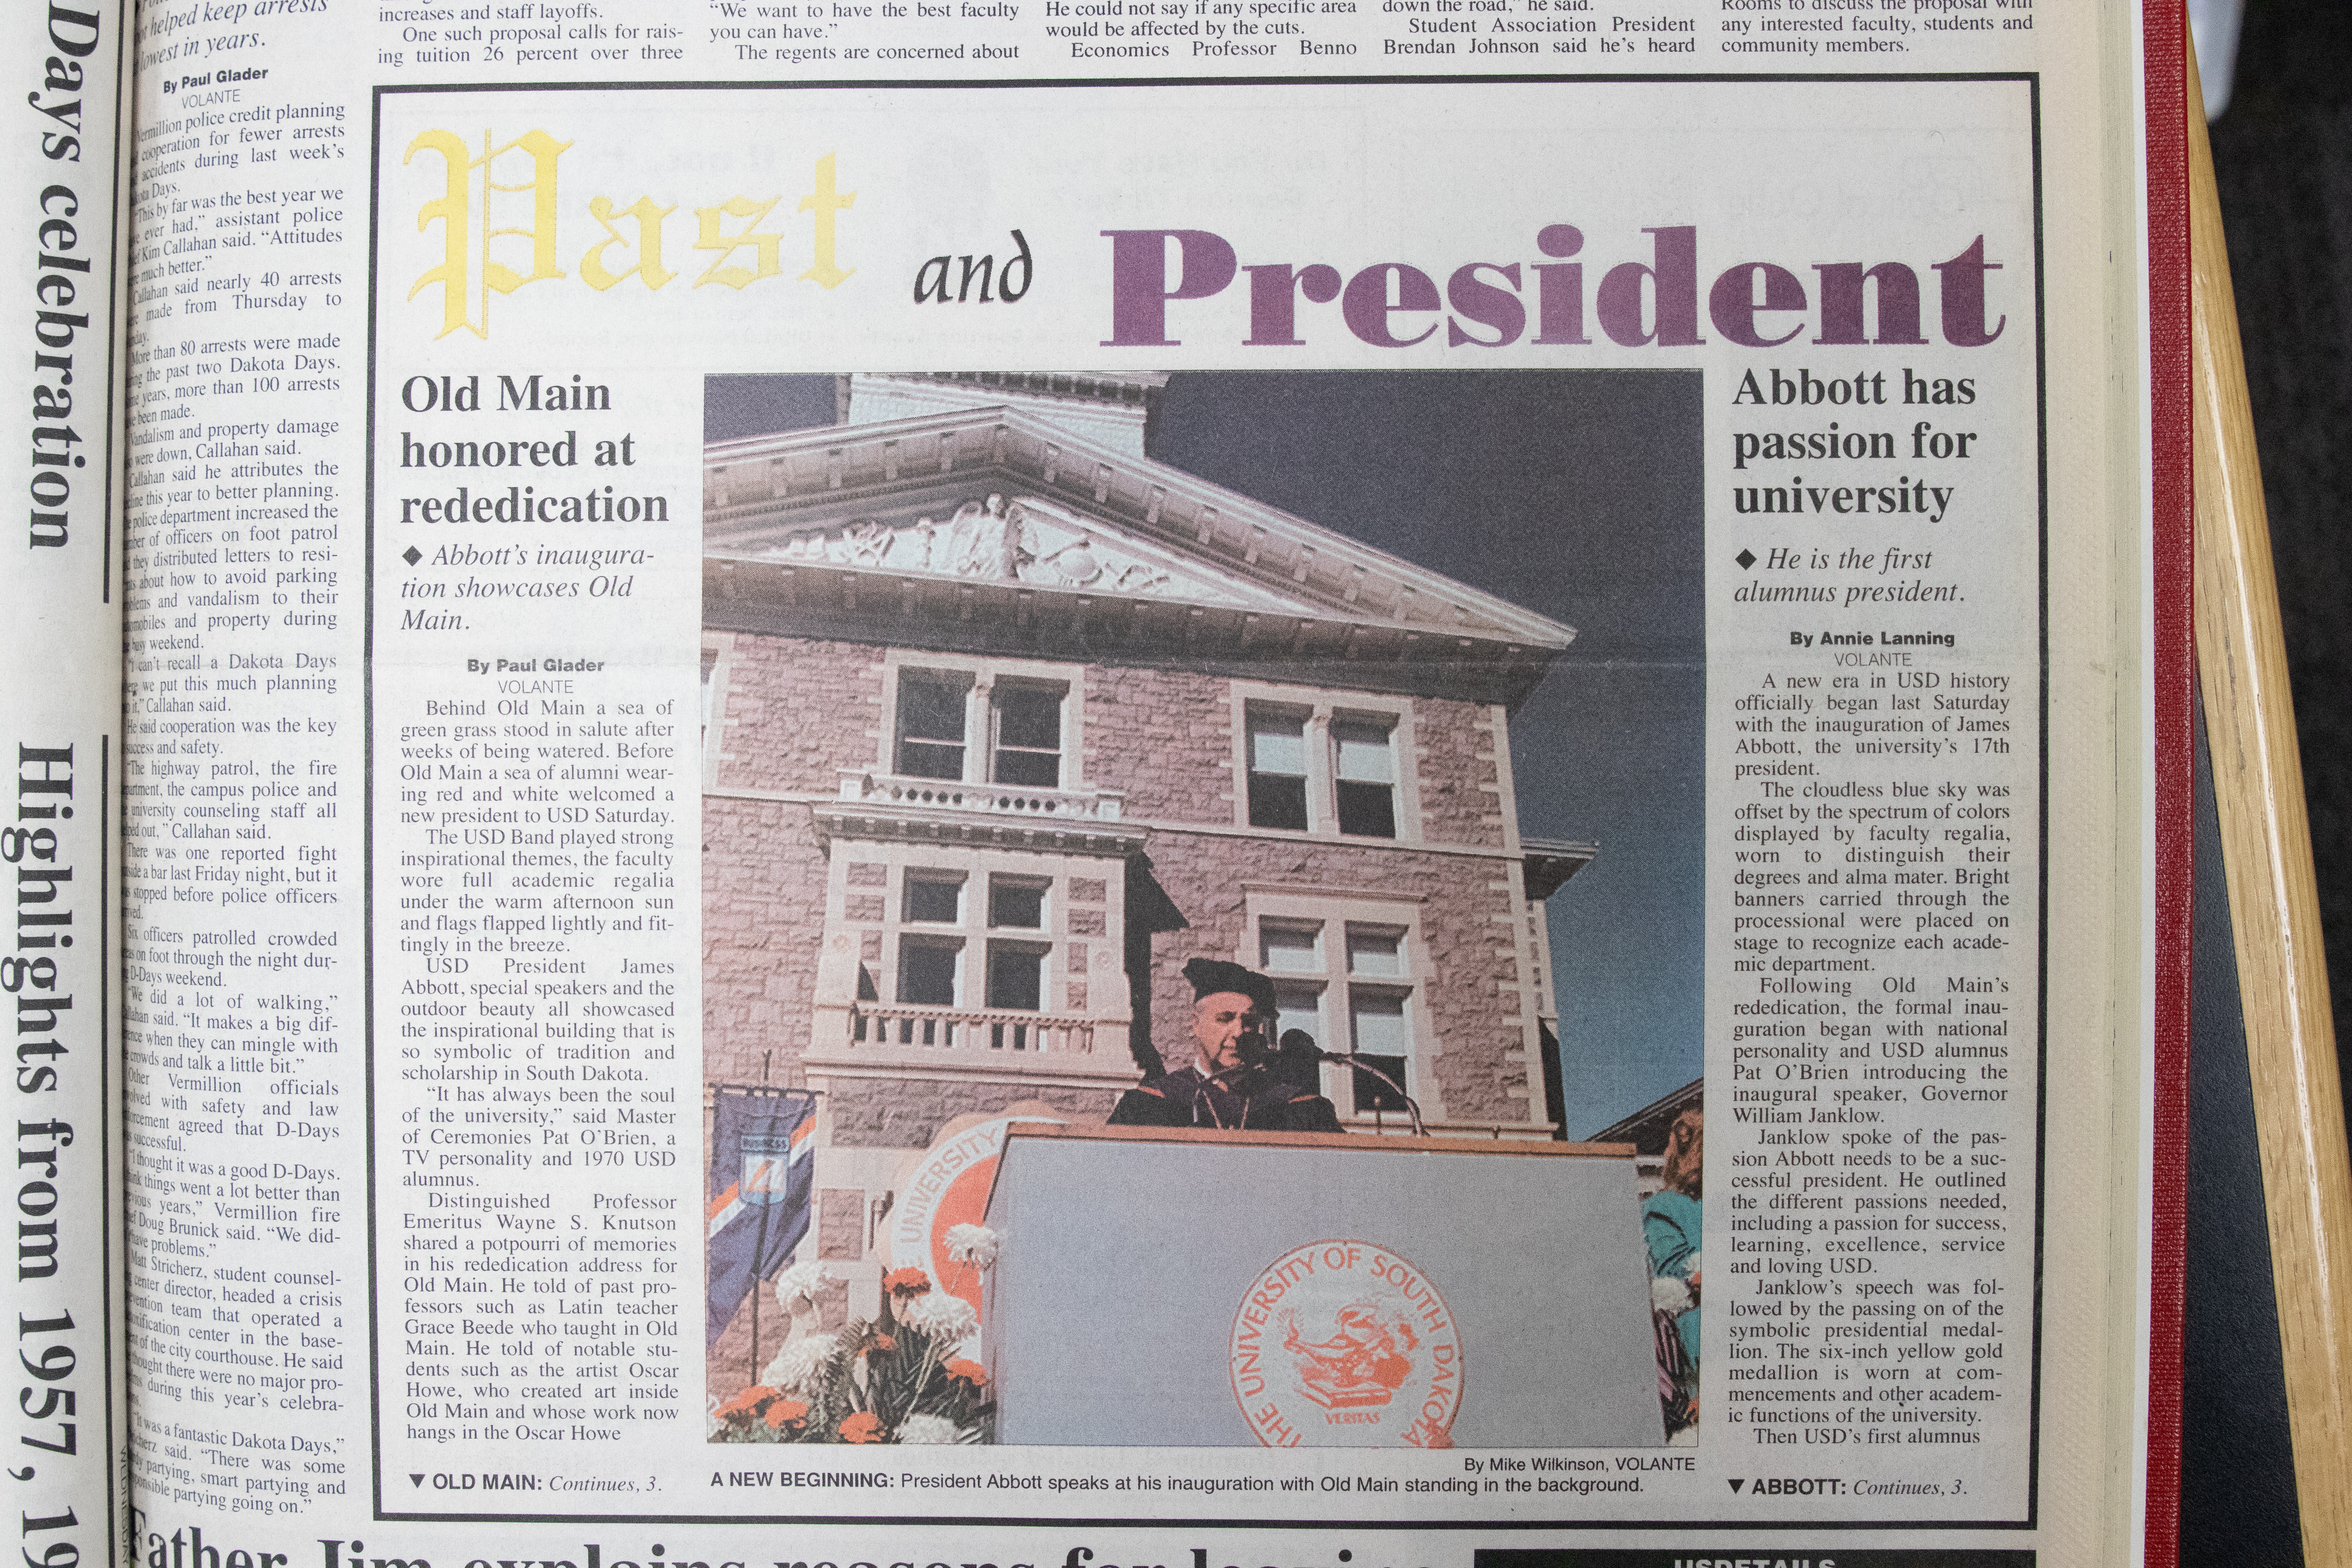 Gestring’s Historic Inauguration: A flashback to past presidential commencements